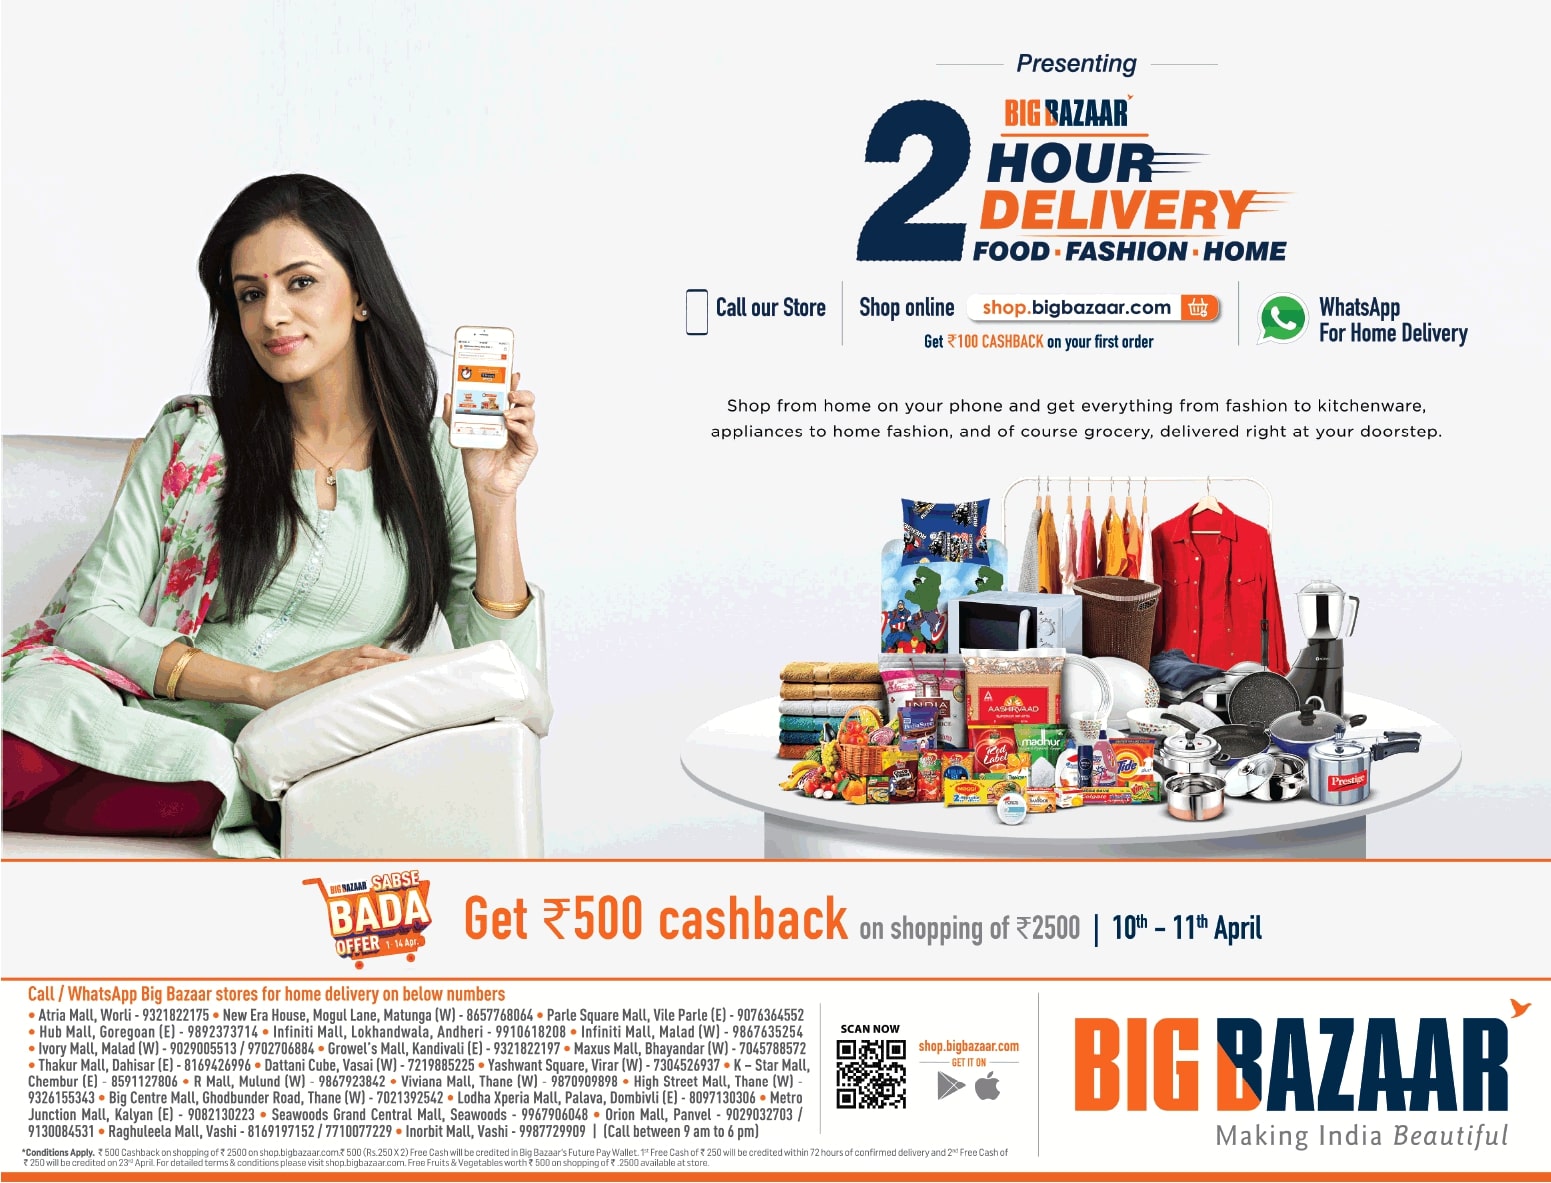 big-bazaar-presenting-2-hours-delivery-food-fashion-home-ad-bombay-times-10-04-2021